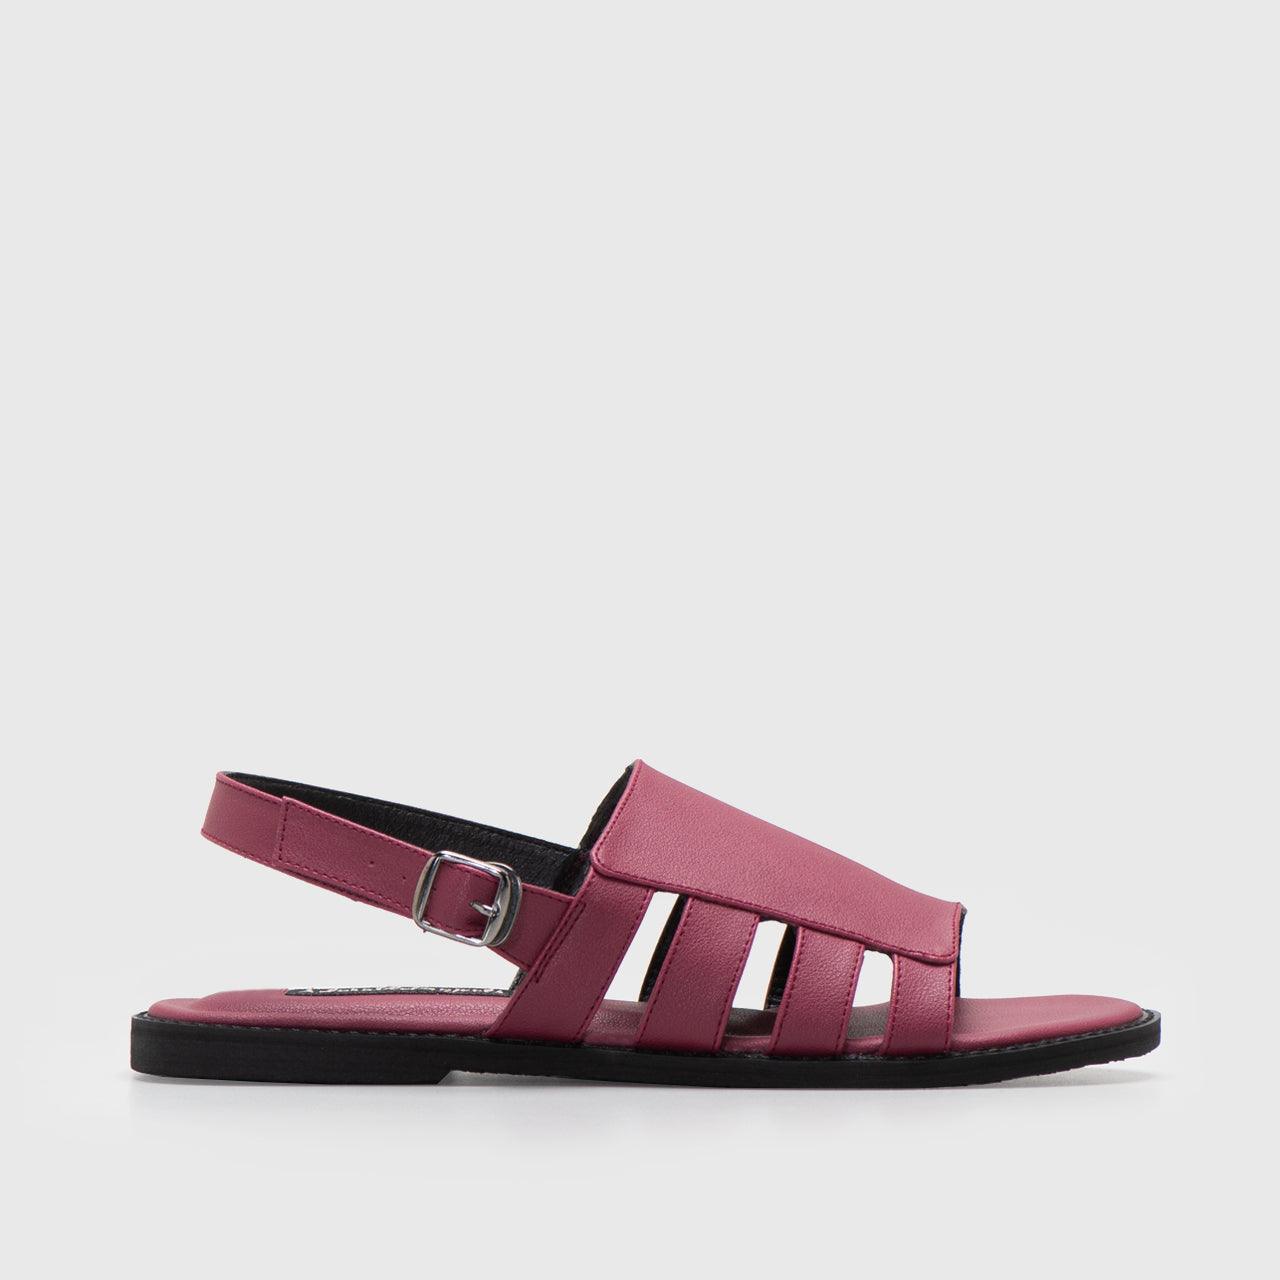 Adorable Projects Sandals Nella Sandals Maroon